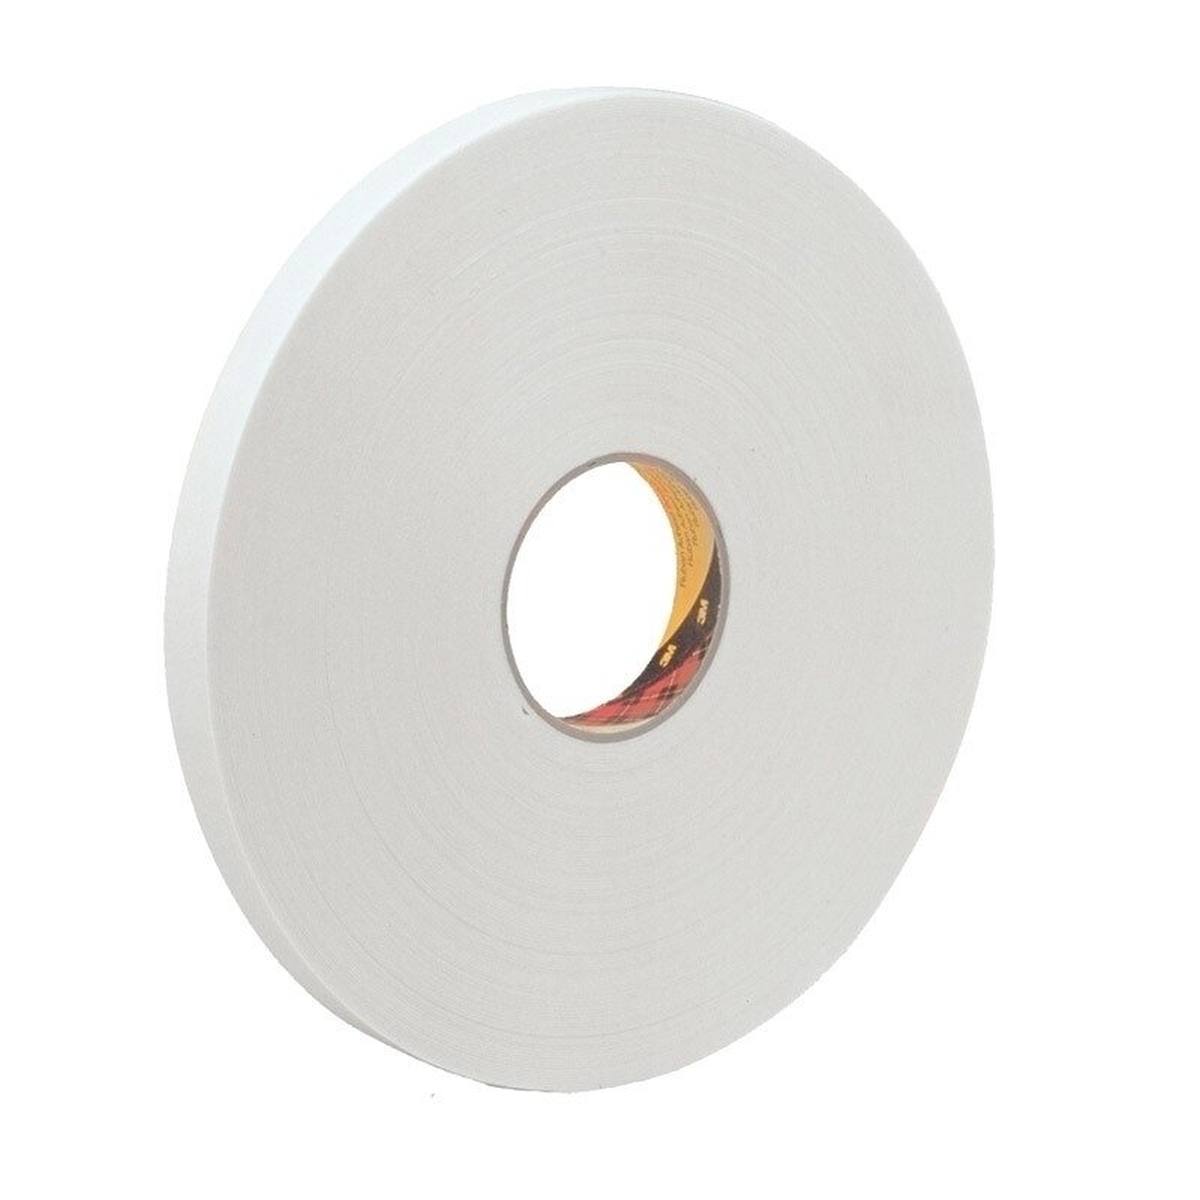 3M PE foam adhesive tape with acrylic adhesive 9539, white, 9 mm x 66 m, 0.8 mm